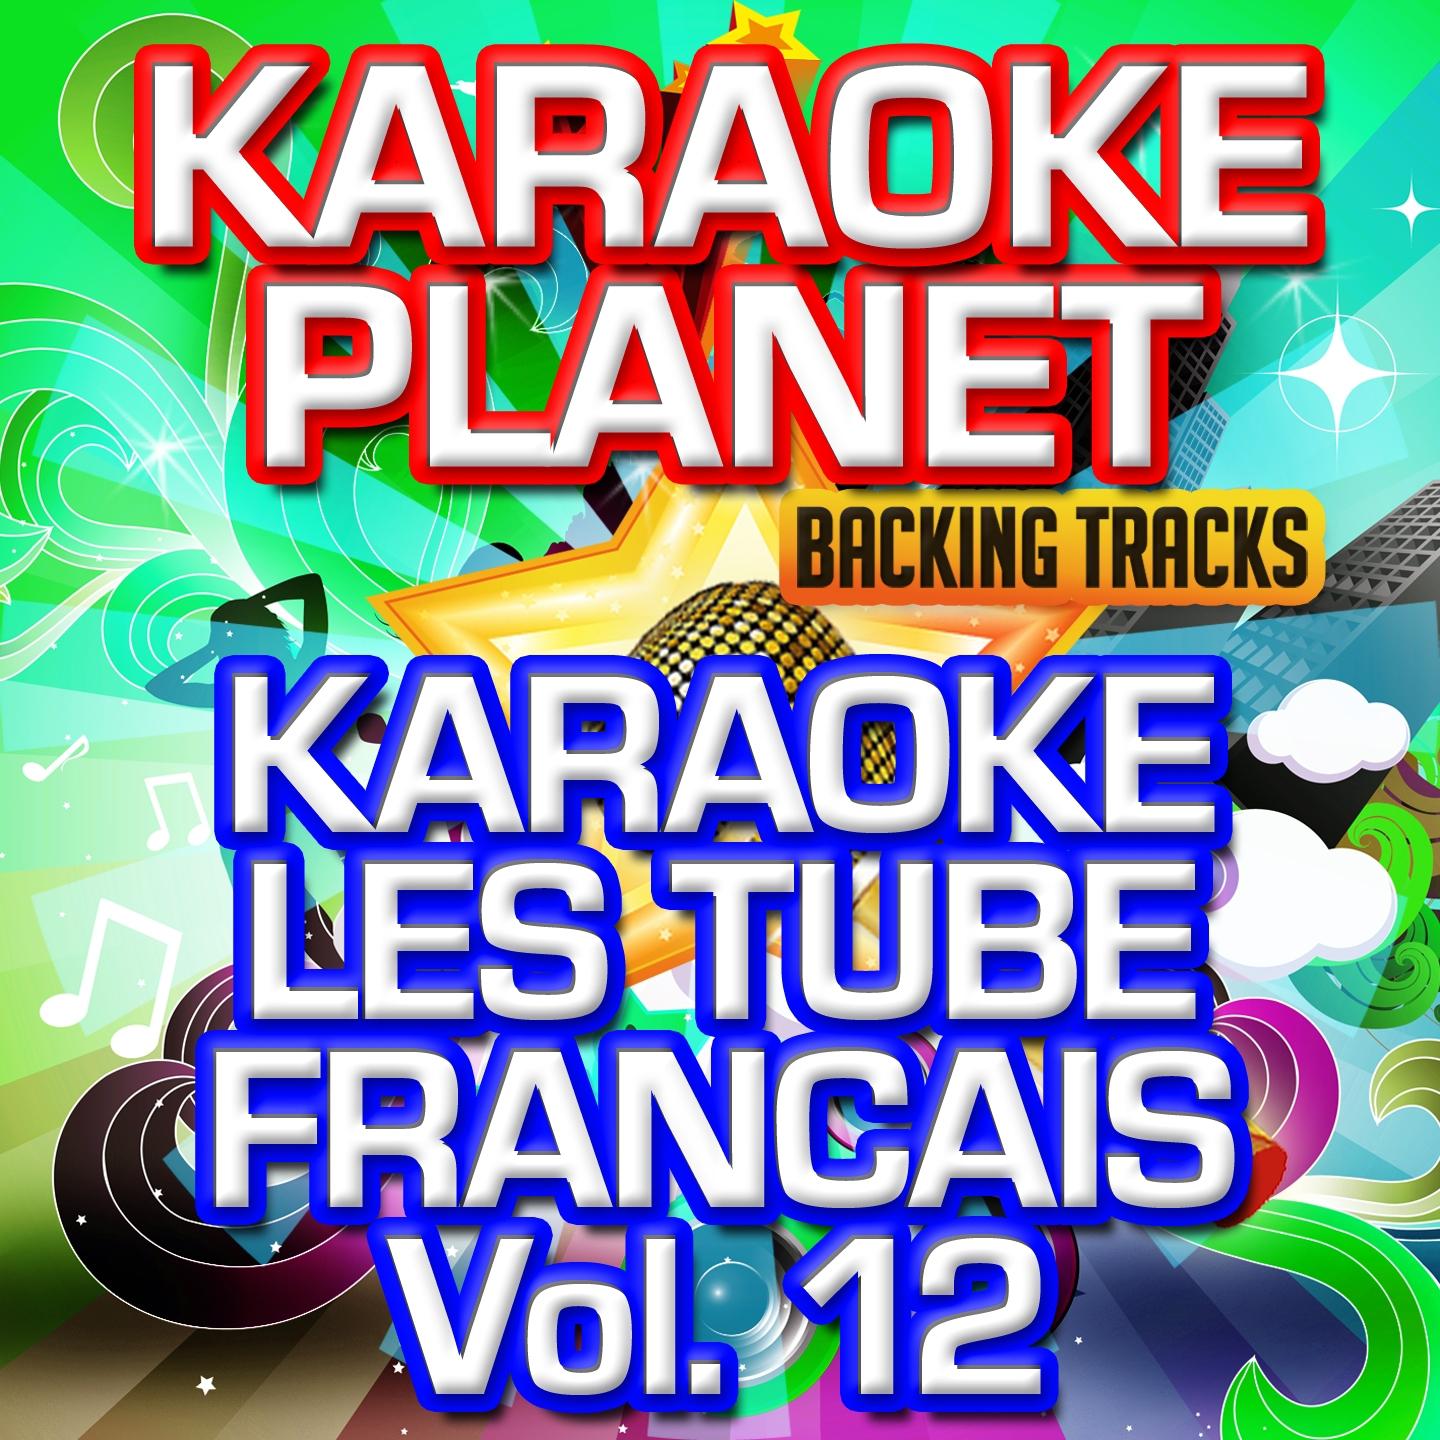 Champs Elyse es Karaoke Version With Background Vocals Originally Performed By Joe Dassin